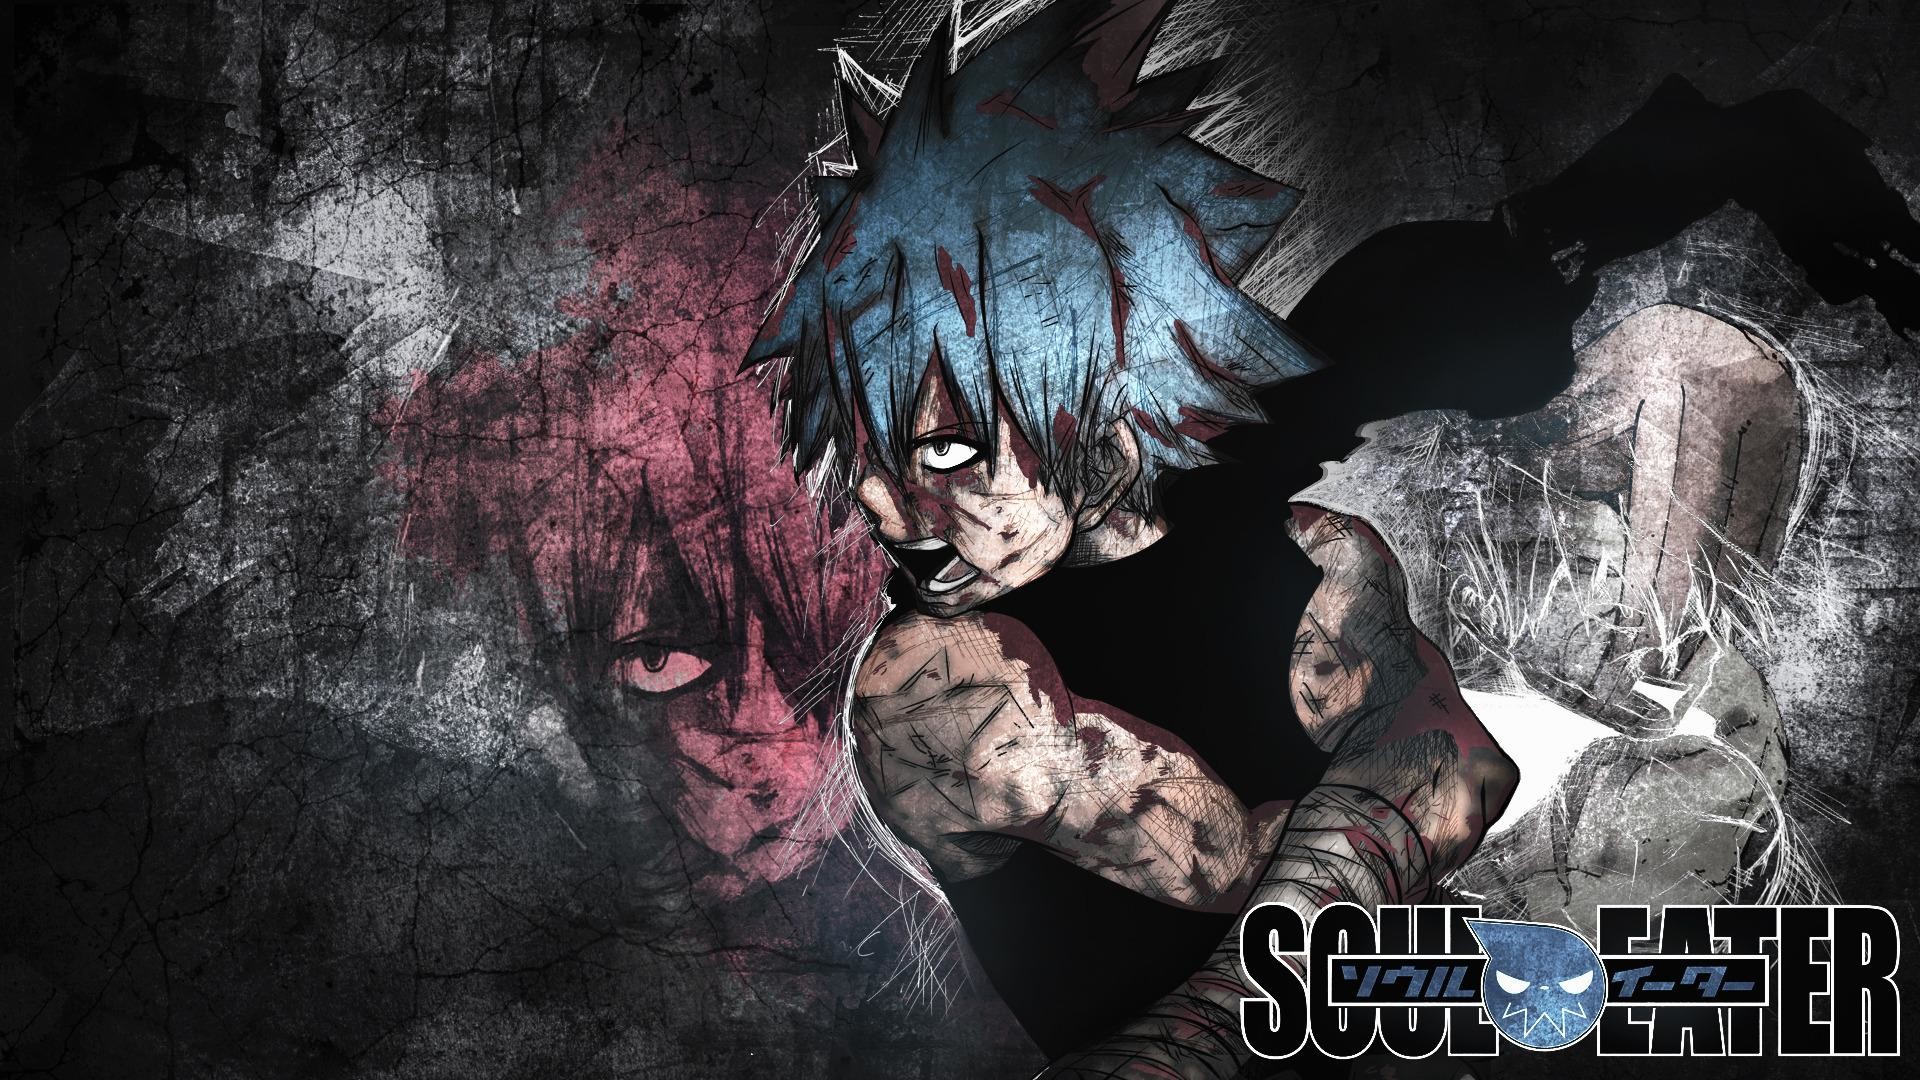 1920x1080 ... 210 Soul Eater HD Wallpapers | Backgrounds - Wallpaper Abyss ...